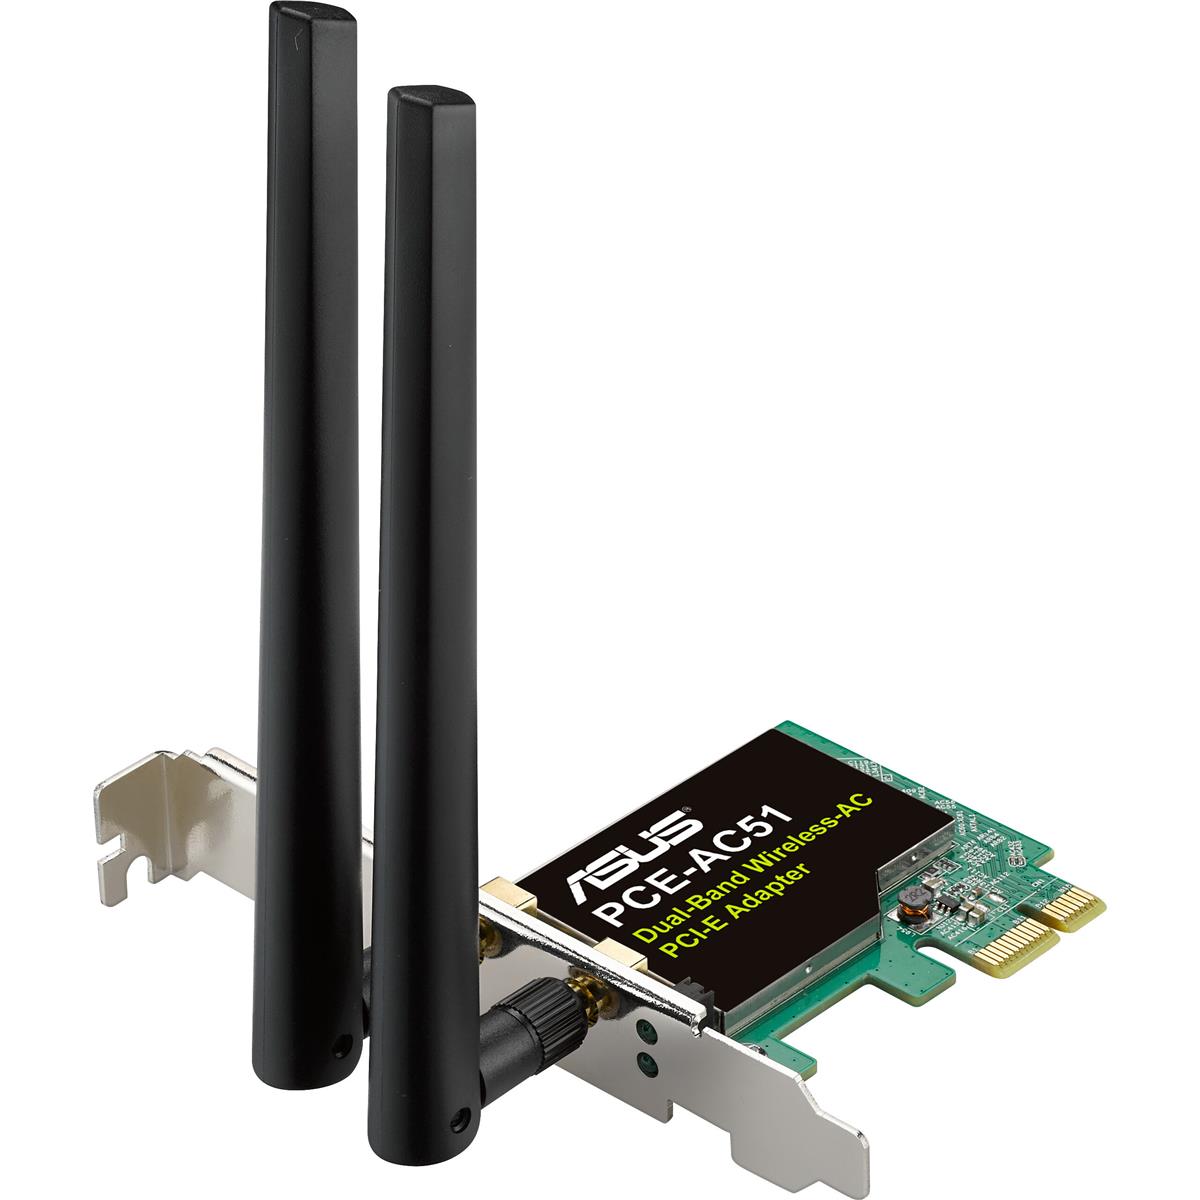 Image of ASUS PCE-AC51 AC750 Dual-Band PCIe Wi-Fi Wireless Adapter Card